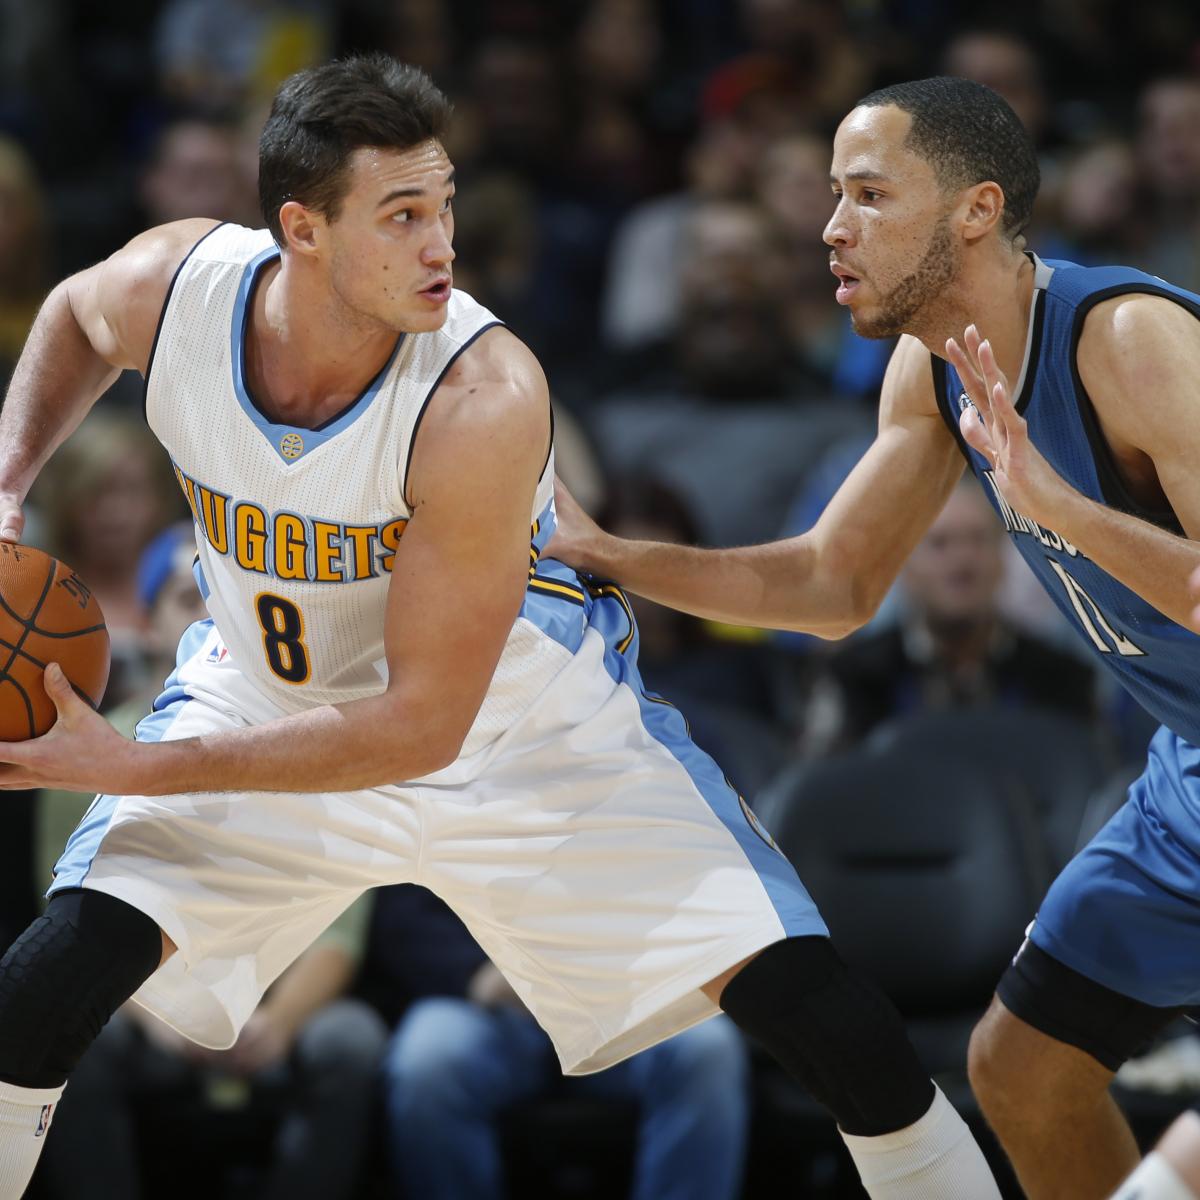 Timberwolves vs Nuggets Score, Video Highlights and Recap from Dec. 11